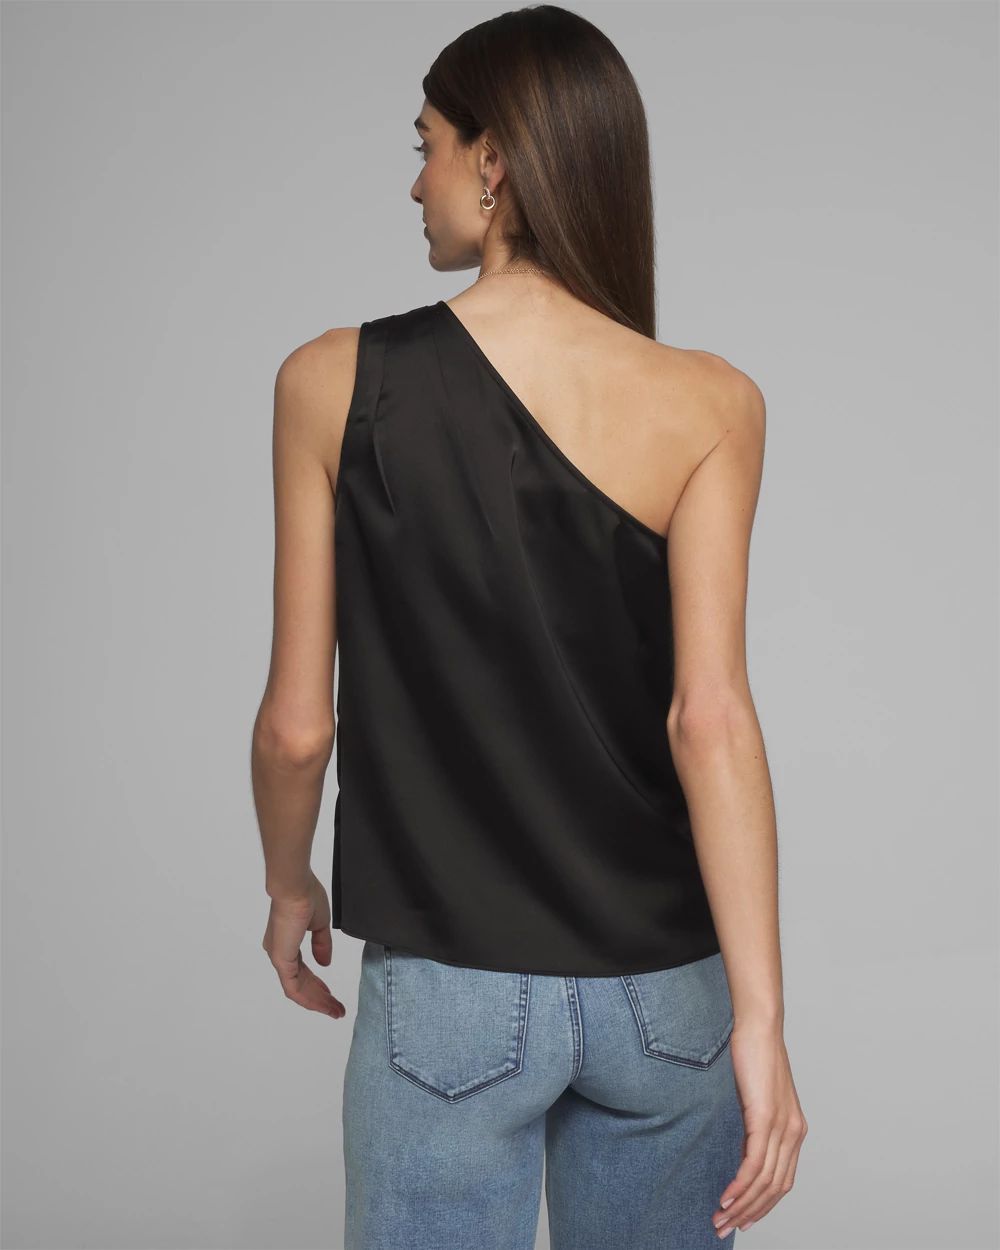 Outlet WHBM One Shoulder Blouse click to view larger image.